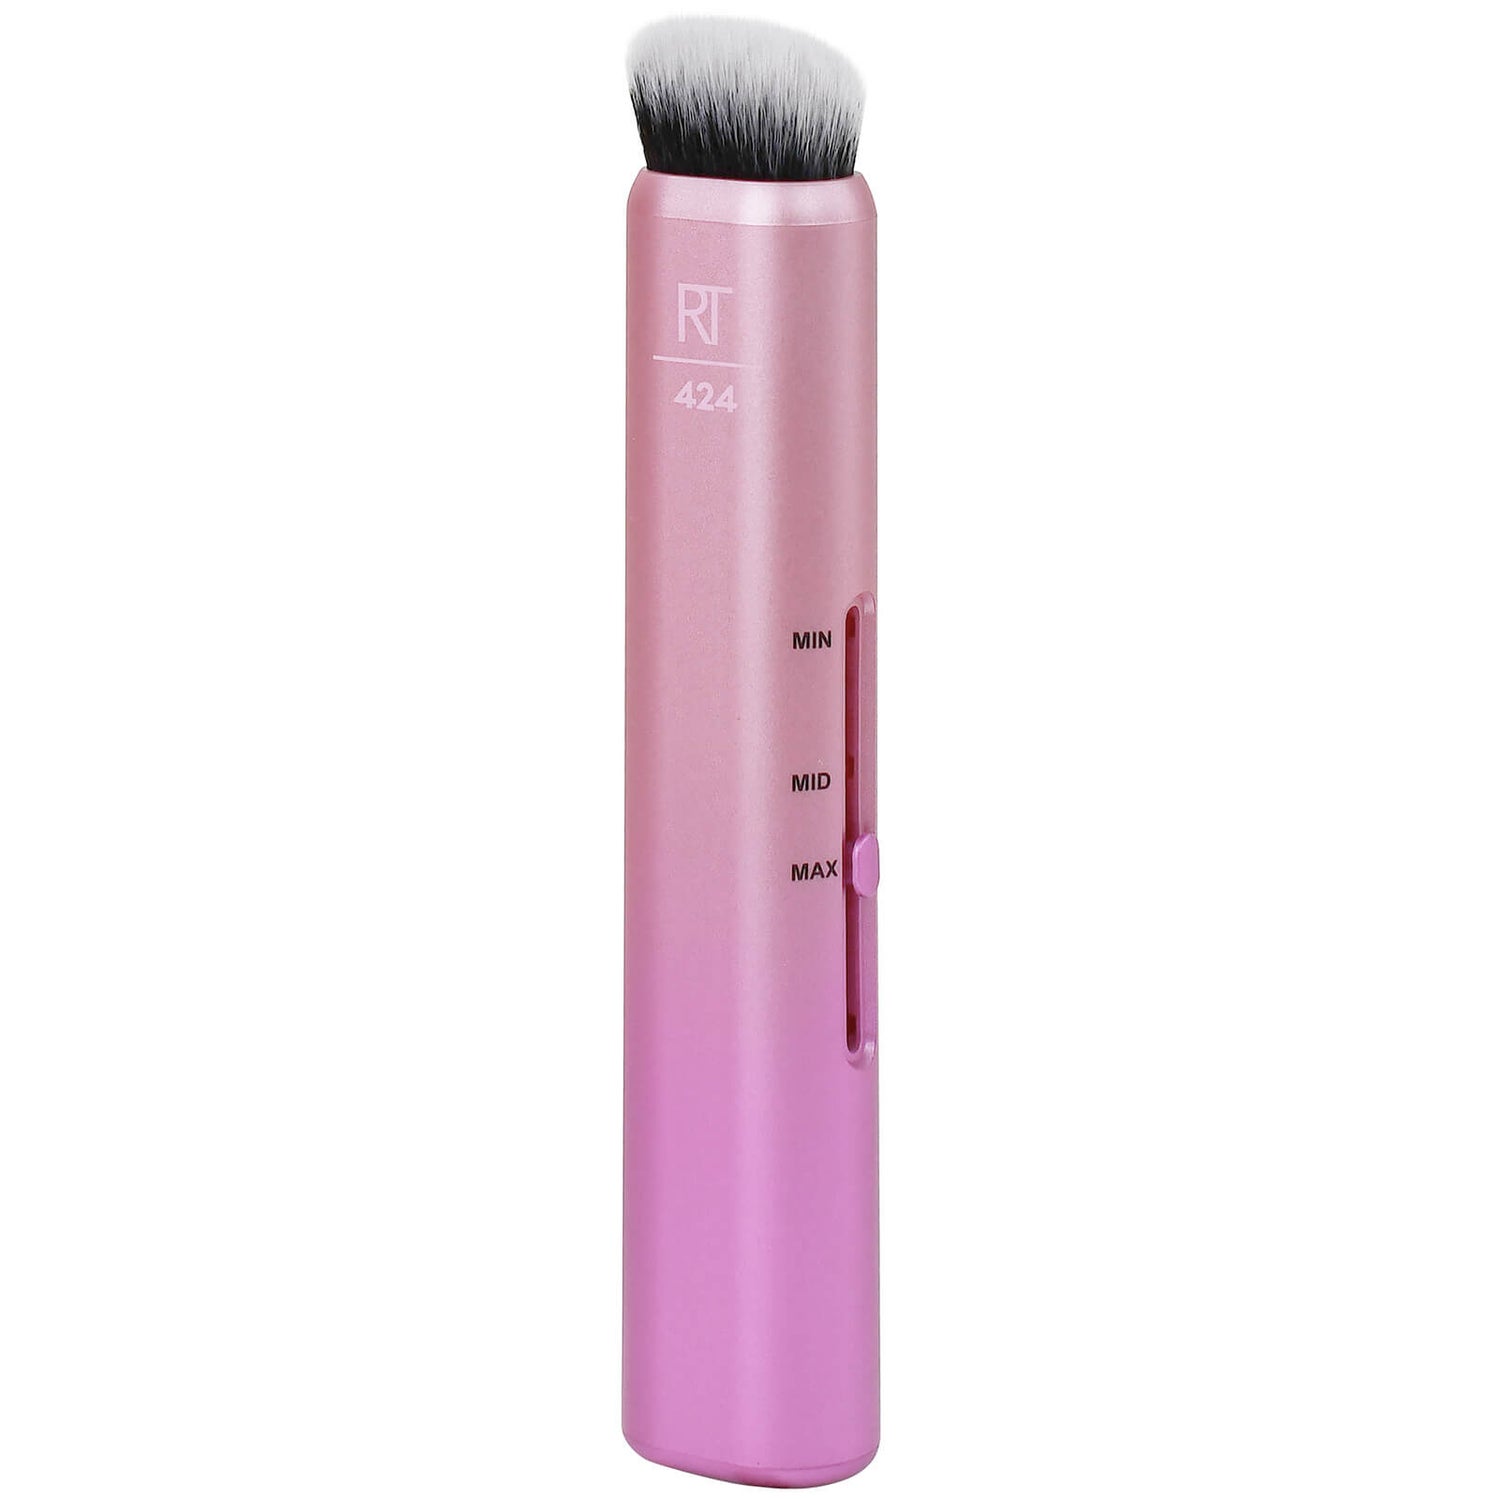 Real Techniques Custom Contour Brush, Free Shipping